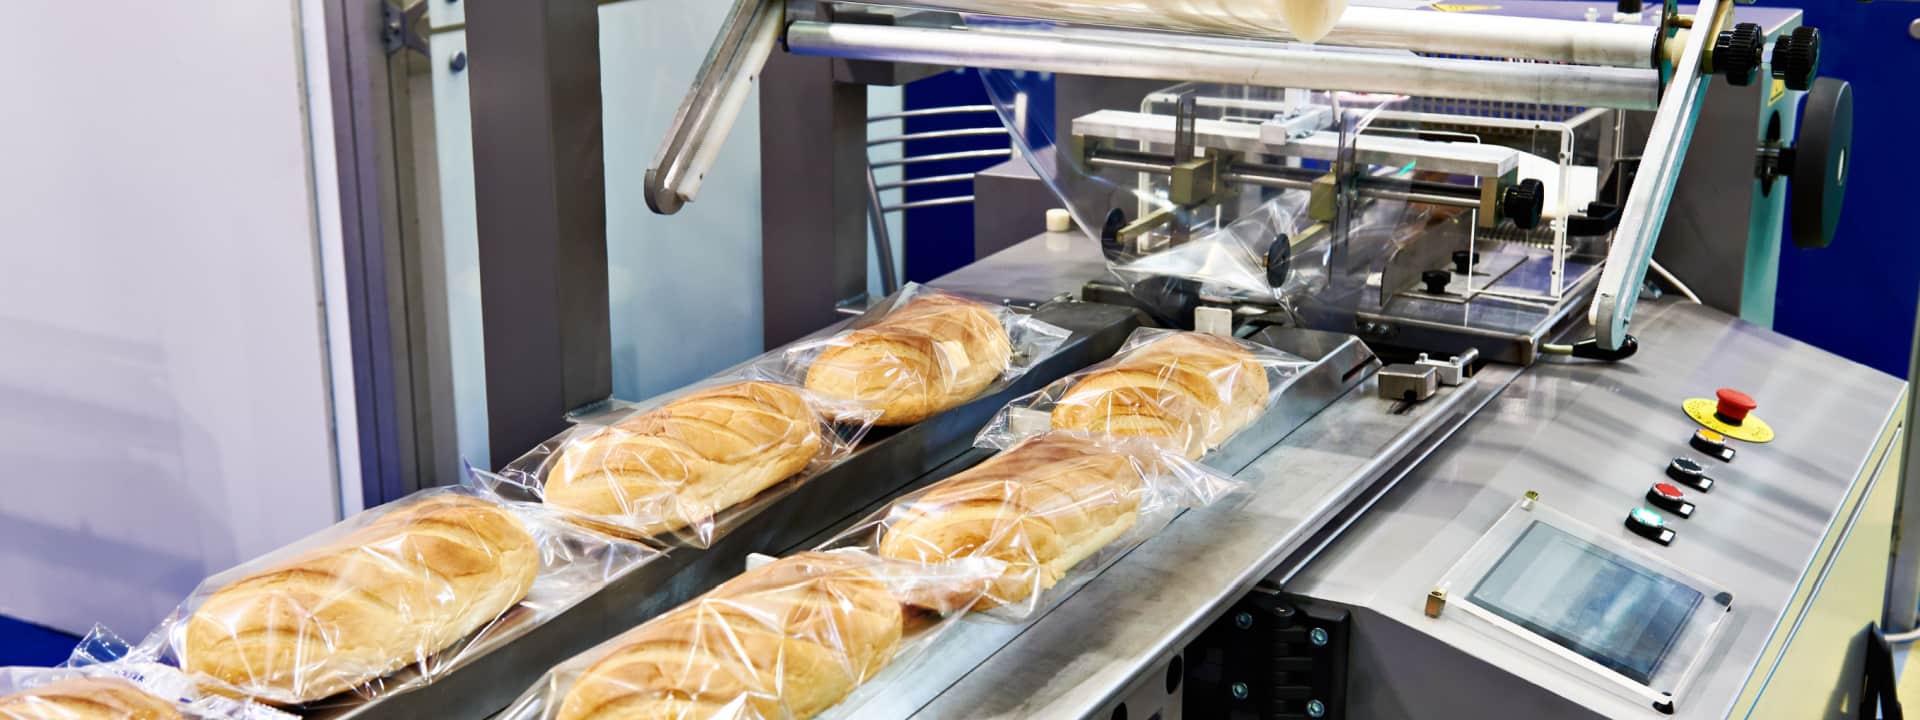 Baked bread being packaged on a conveyor belt